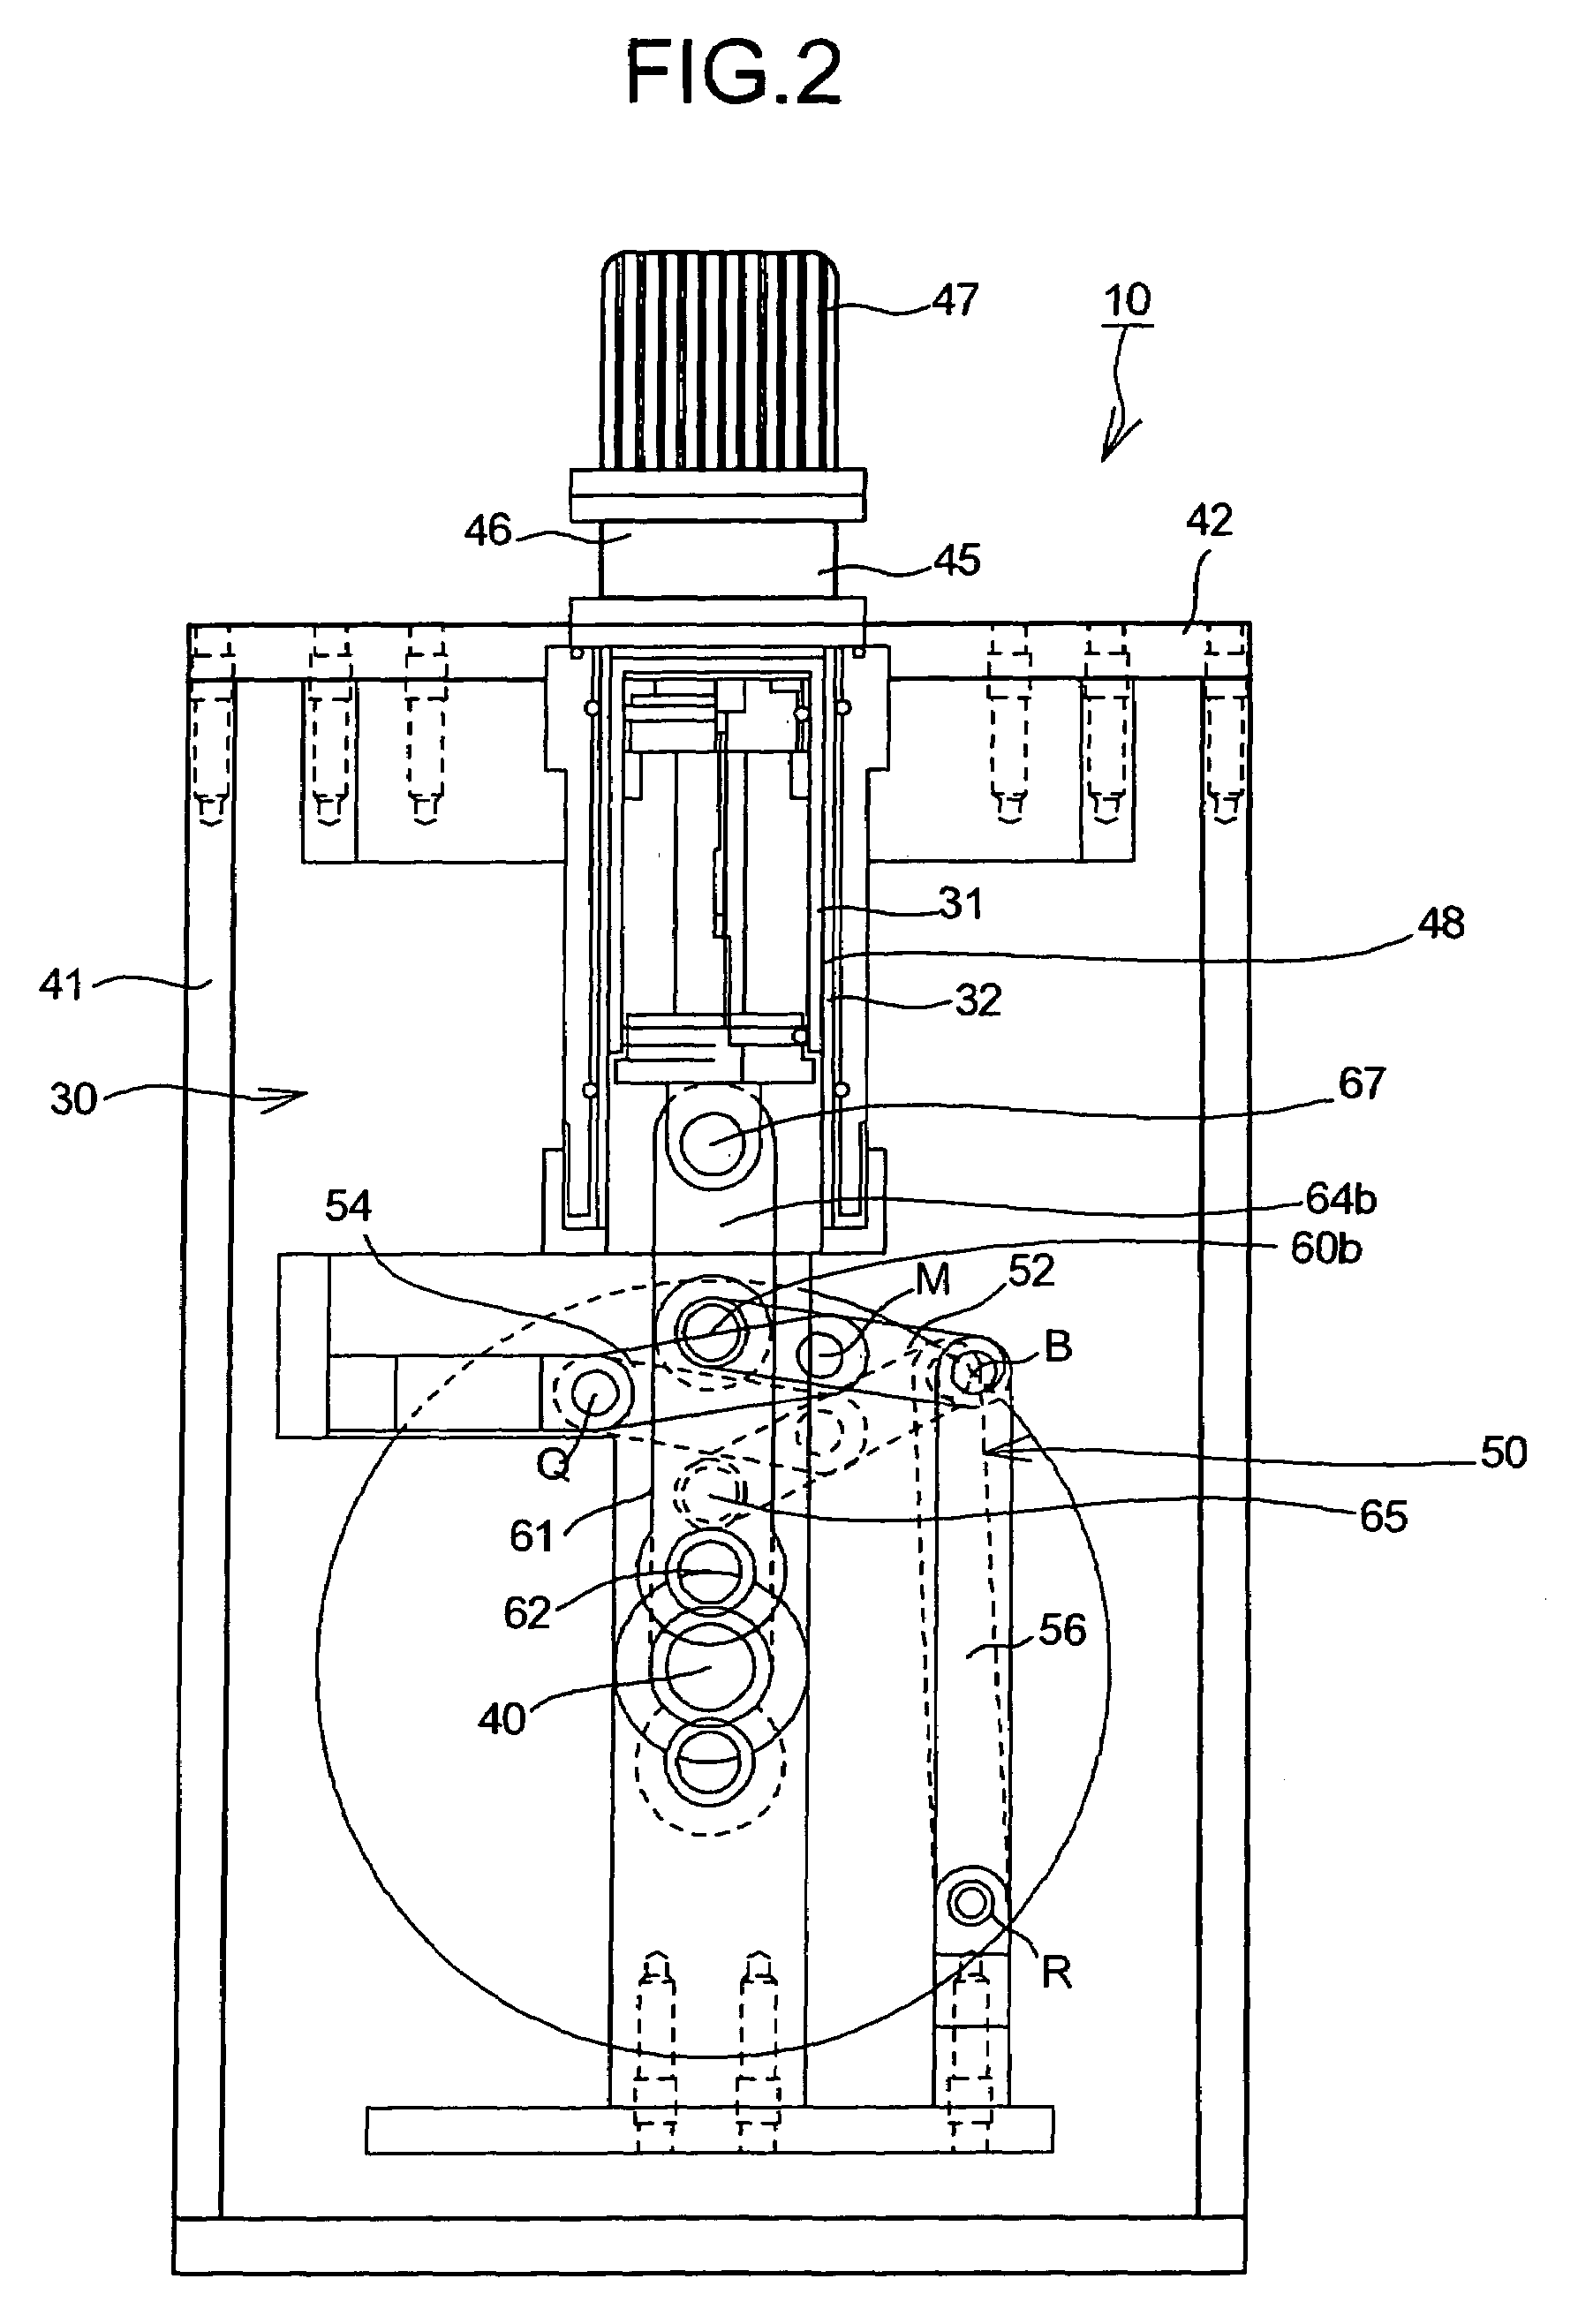 Stirling engine and hybrid system that uses the Stirling engine